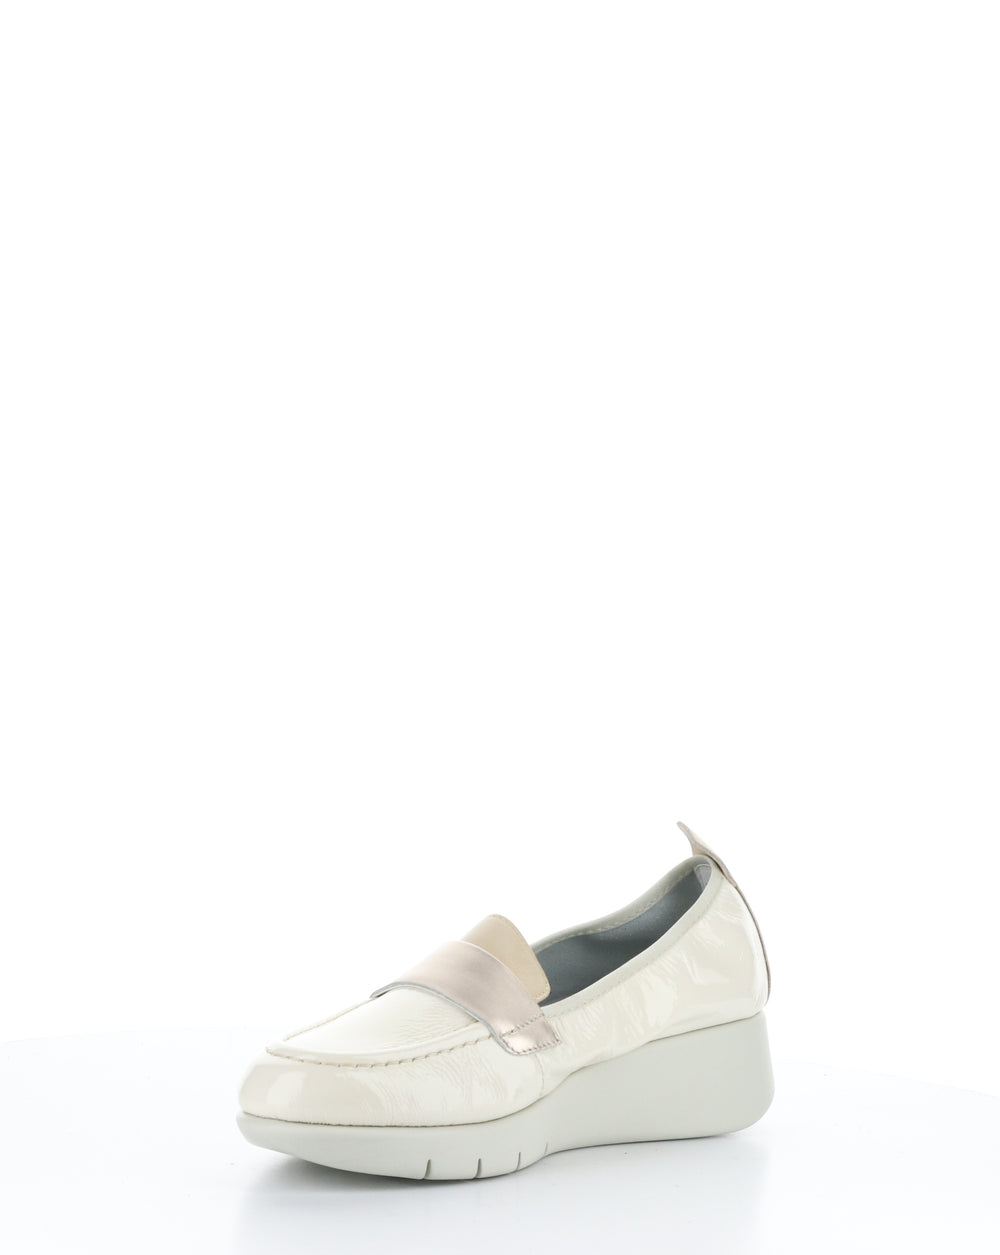 SCREEN MIXED WHITE Round Toe Shoes